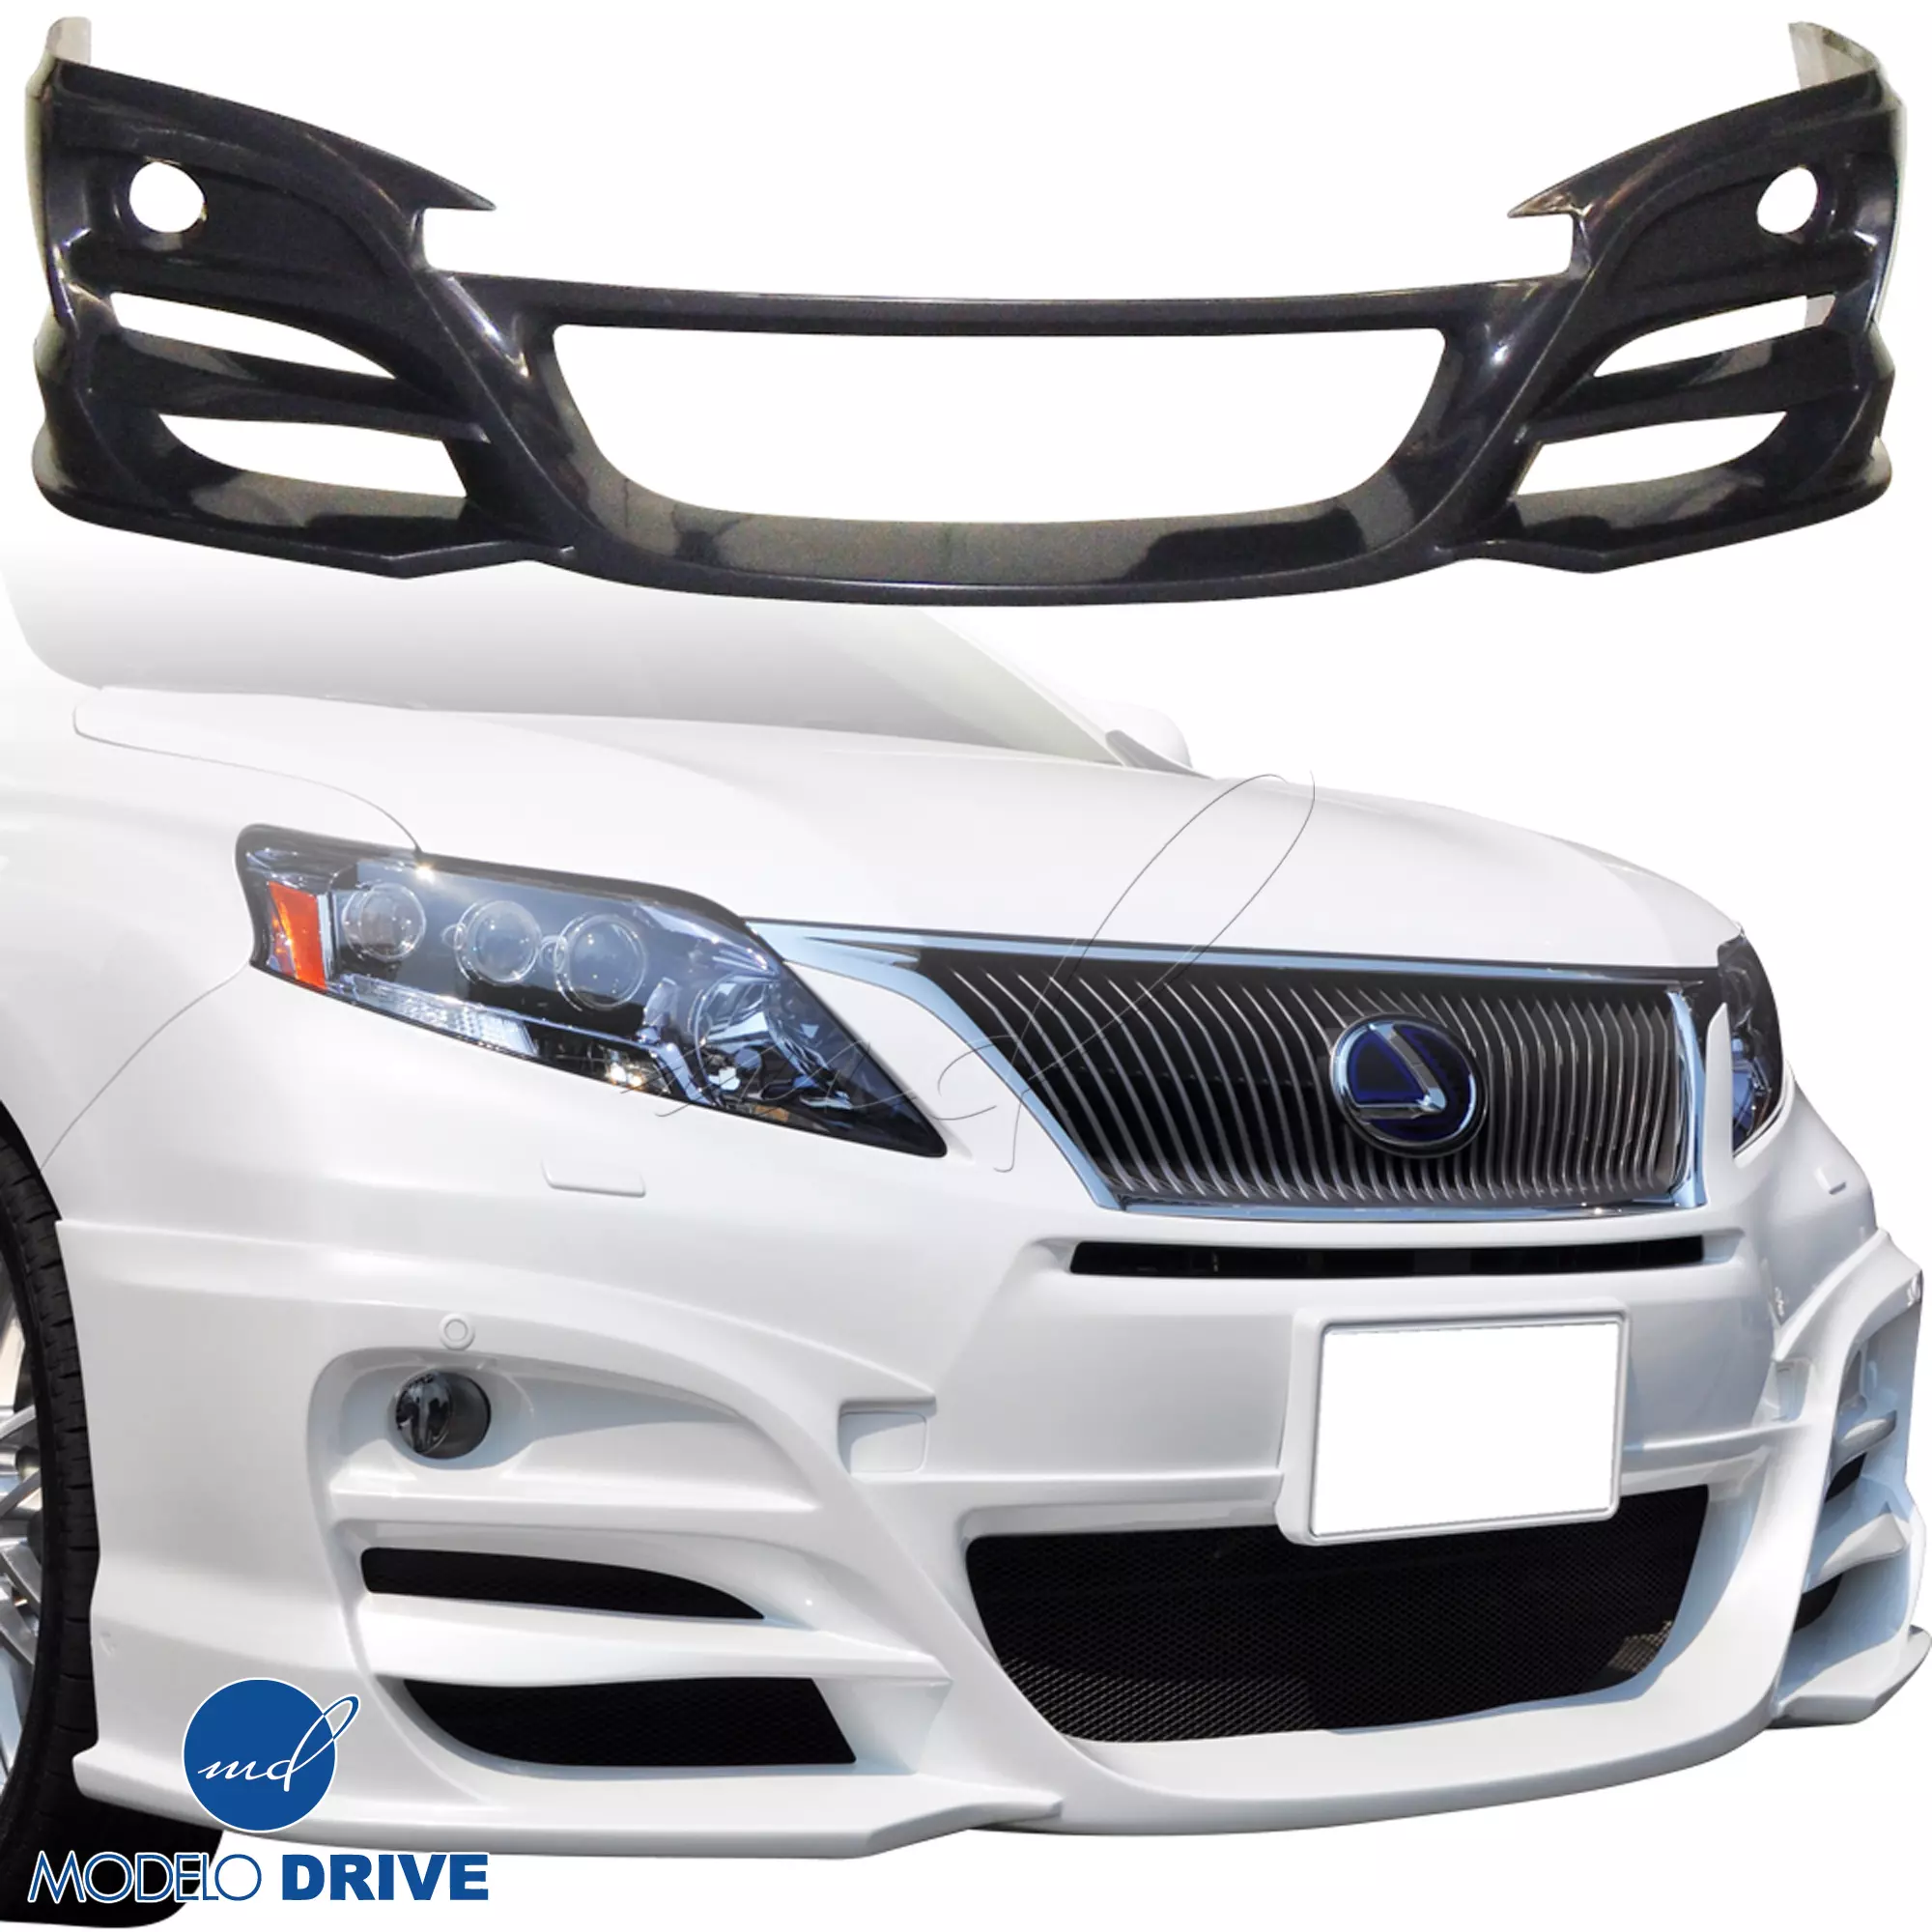 ModeloDrive FRP WAL BISO Front Add-on Valance > Lexus RX-Series RX350 RX450 2010-2012 - Image 8